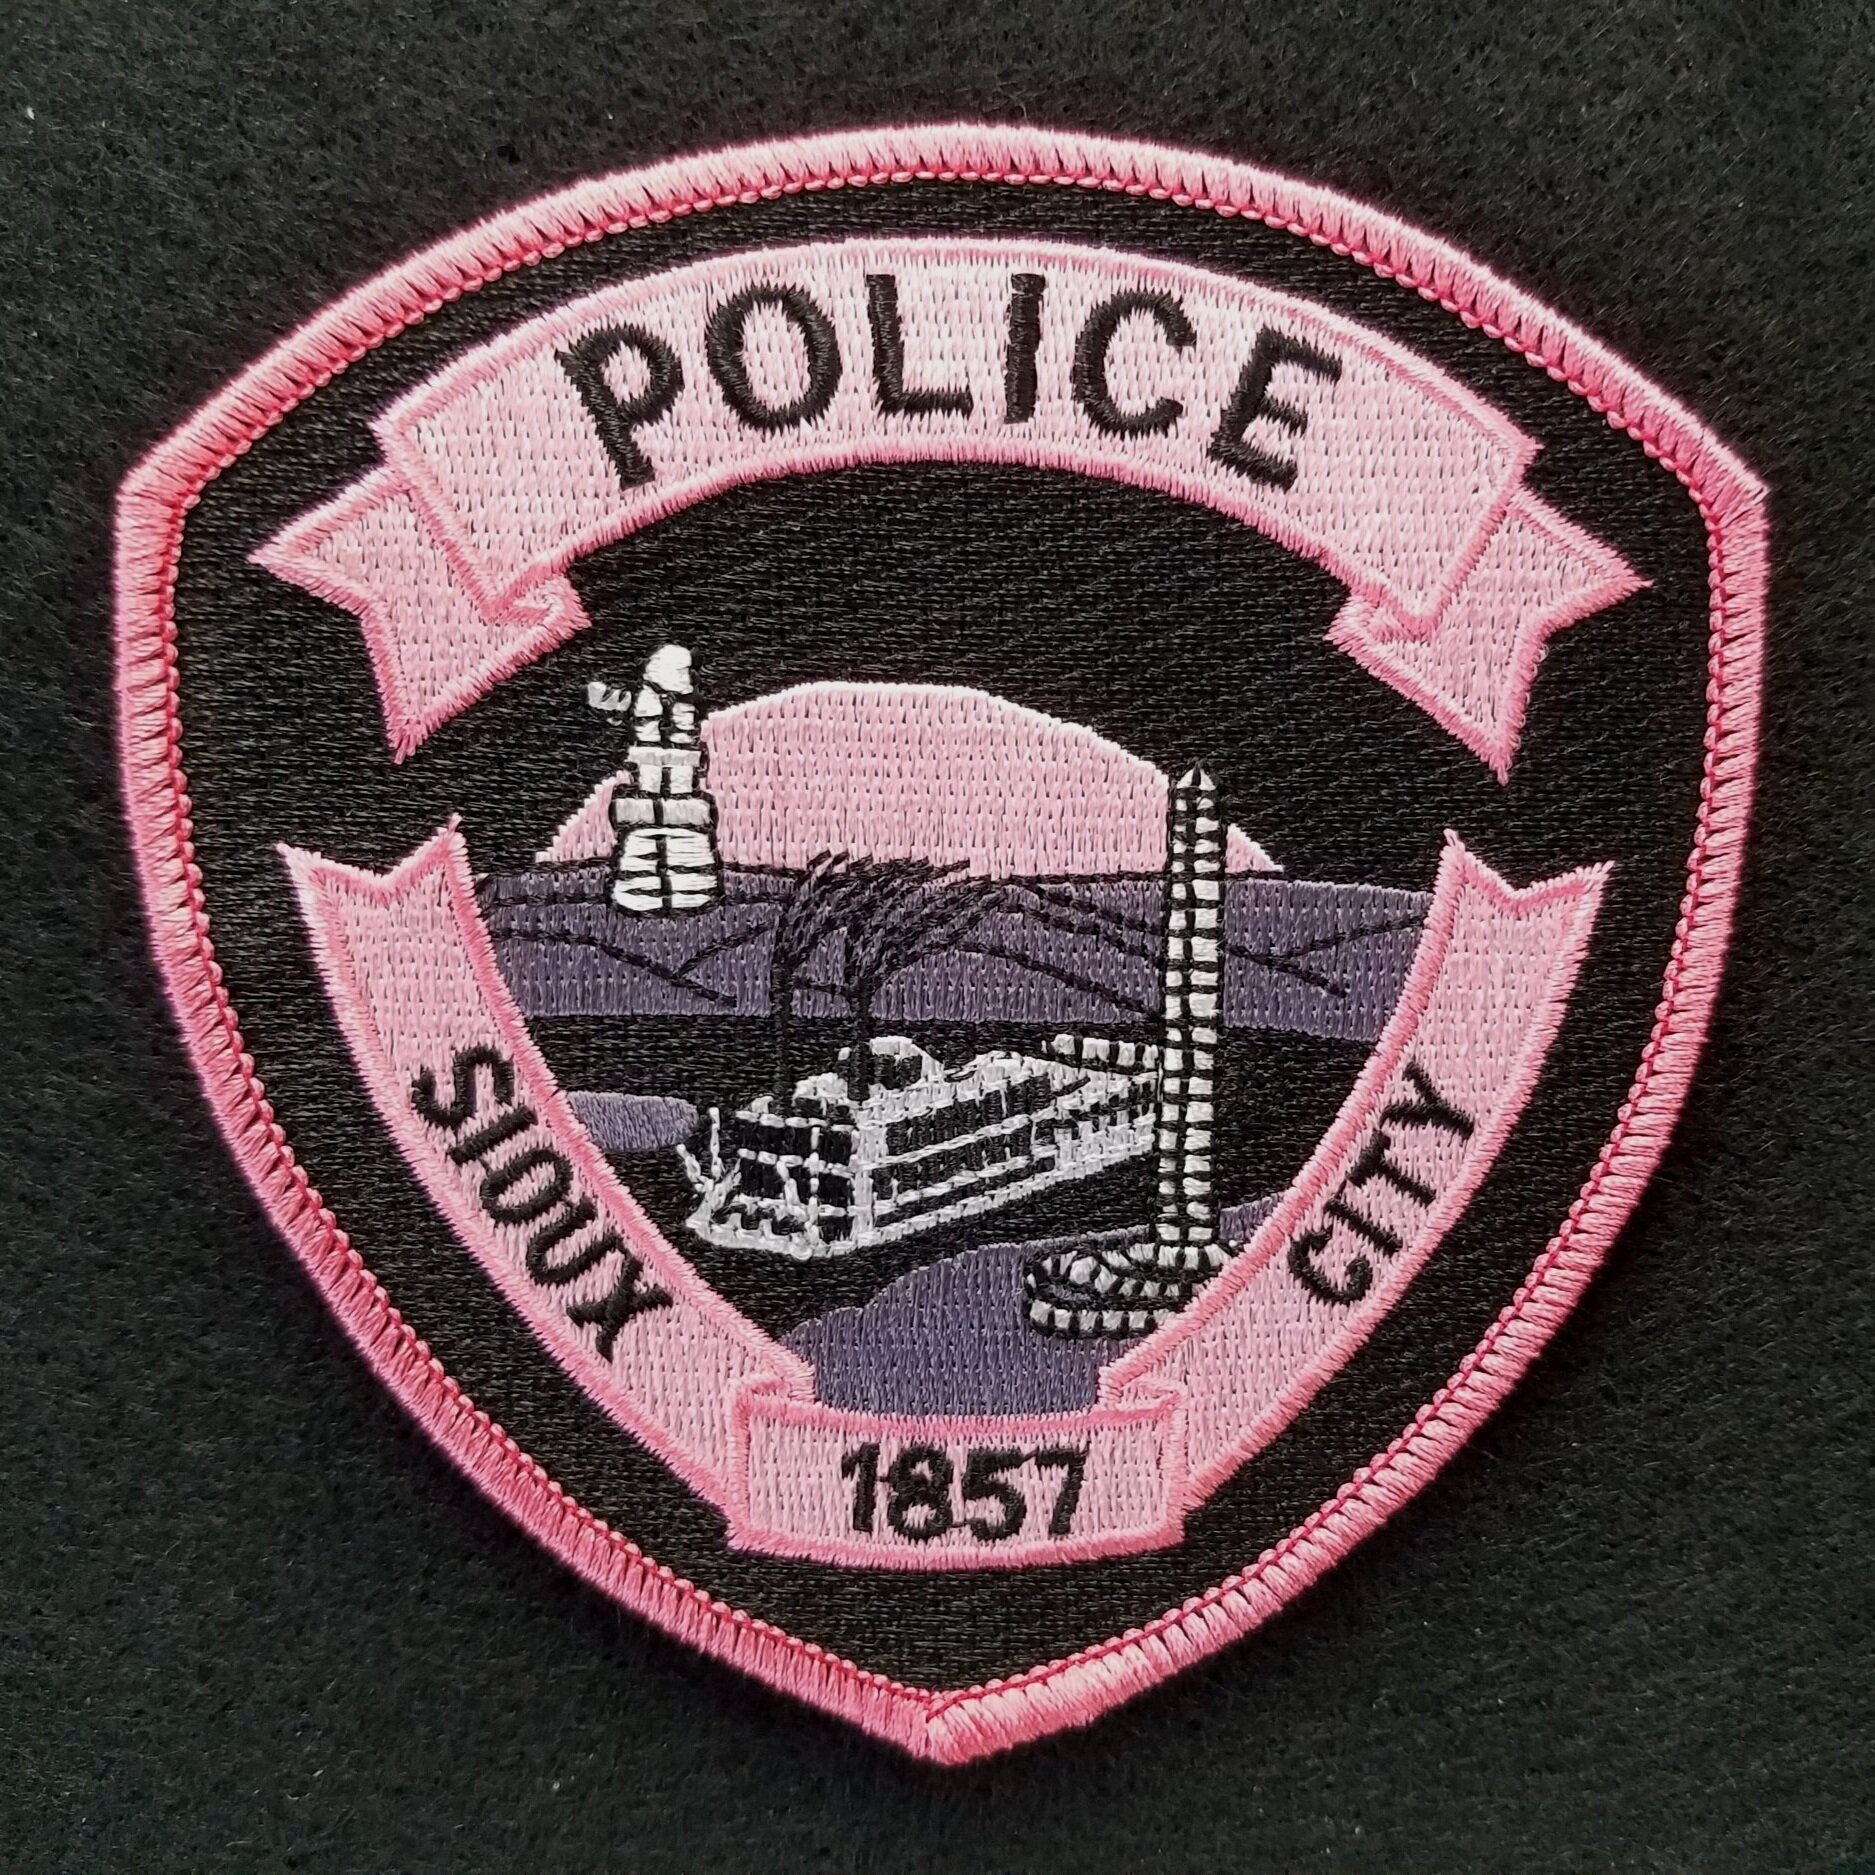 Pink Patch, October 2021 - $10.50